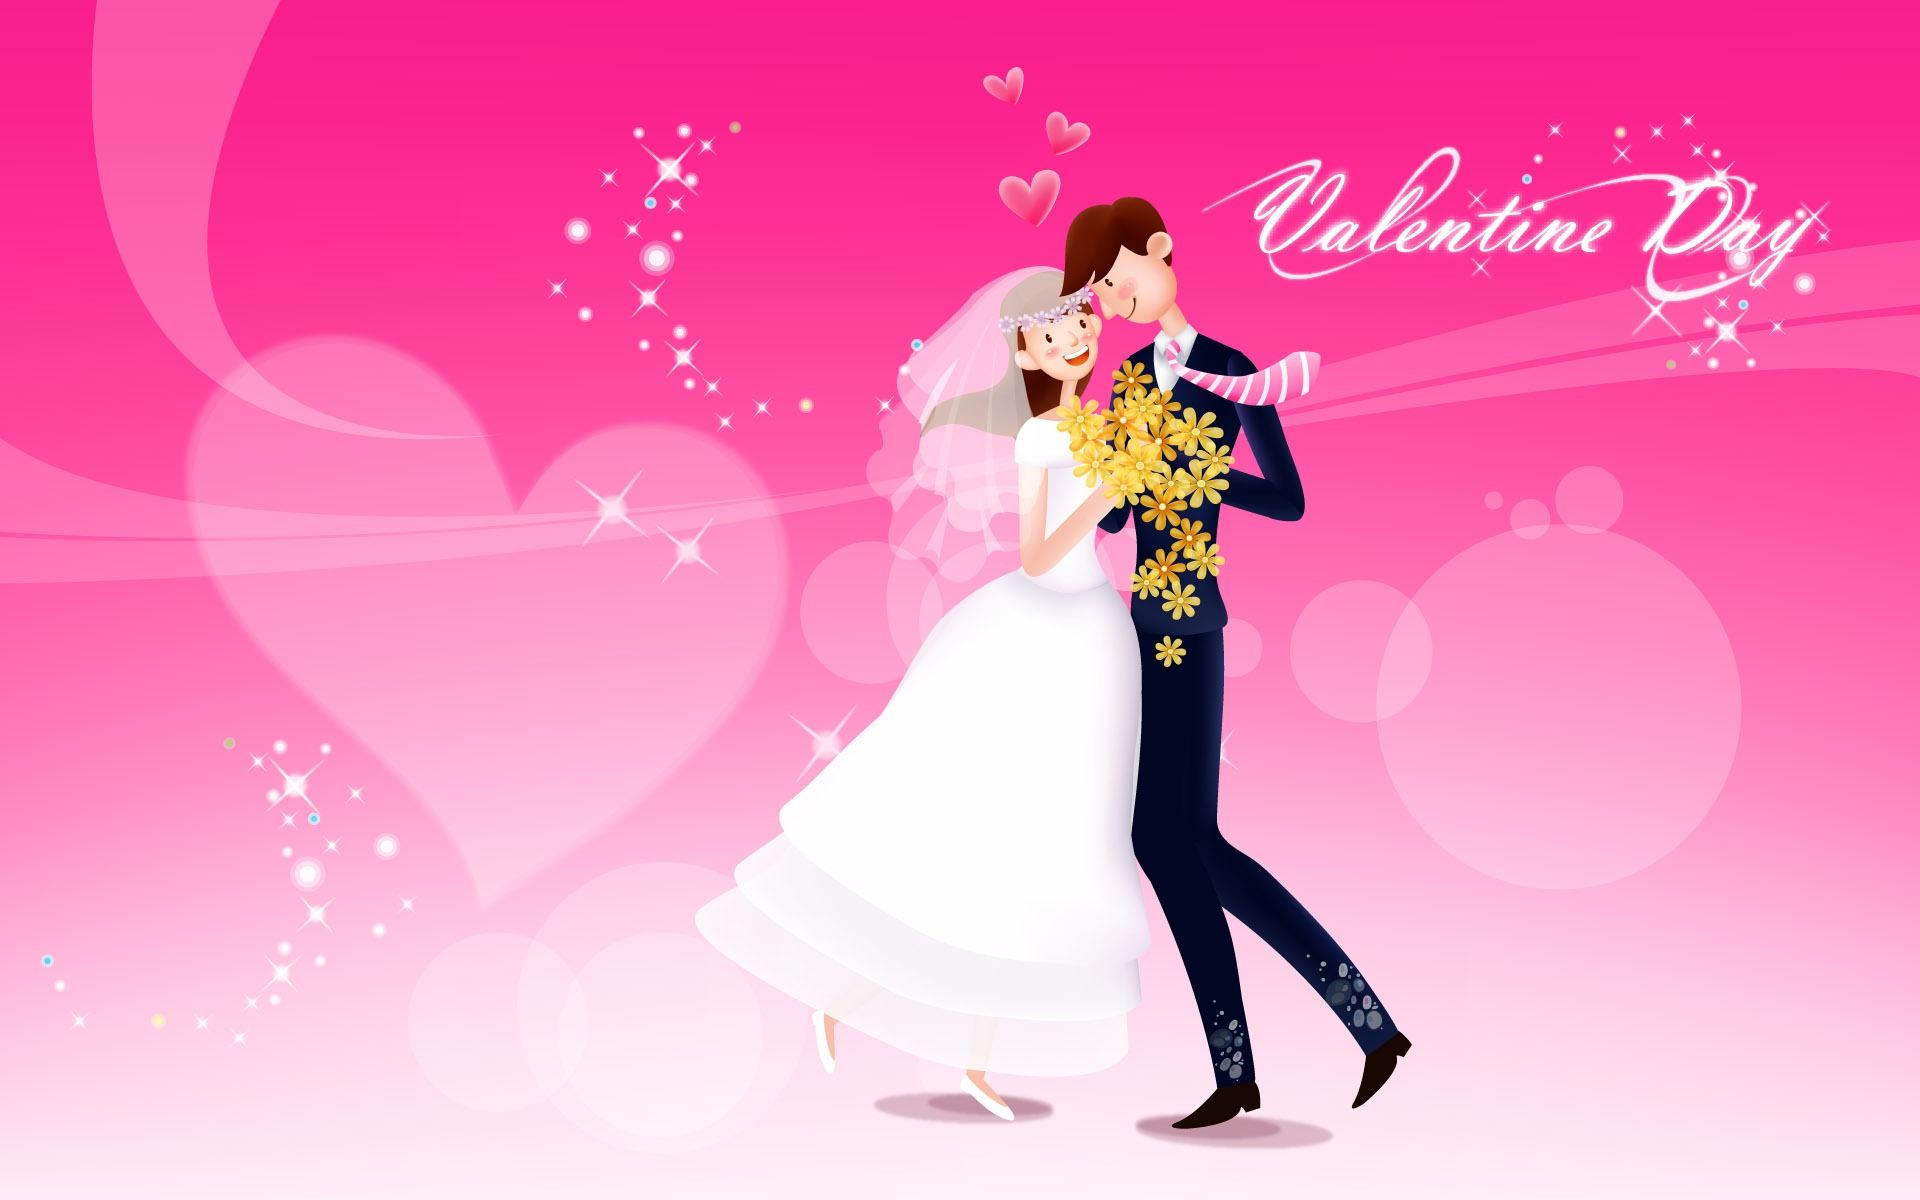 Valentine Day Hd Wallpaper - Valentine Day Full Hd , HD Wallpaper & Backgrounds